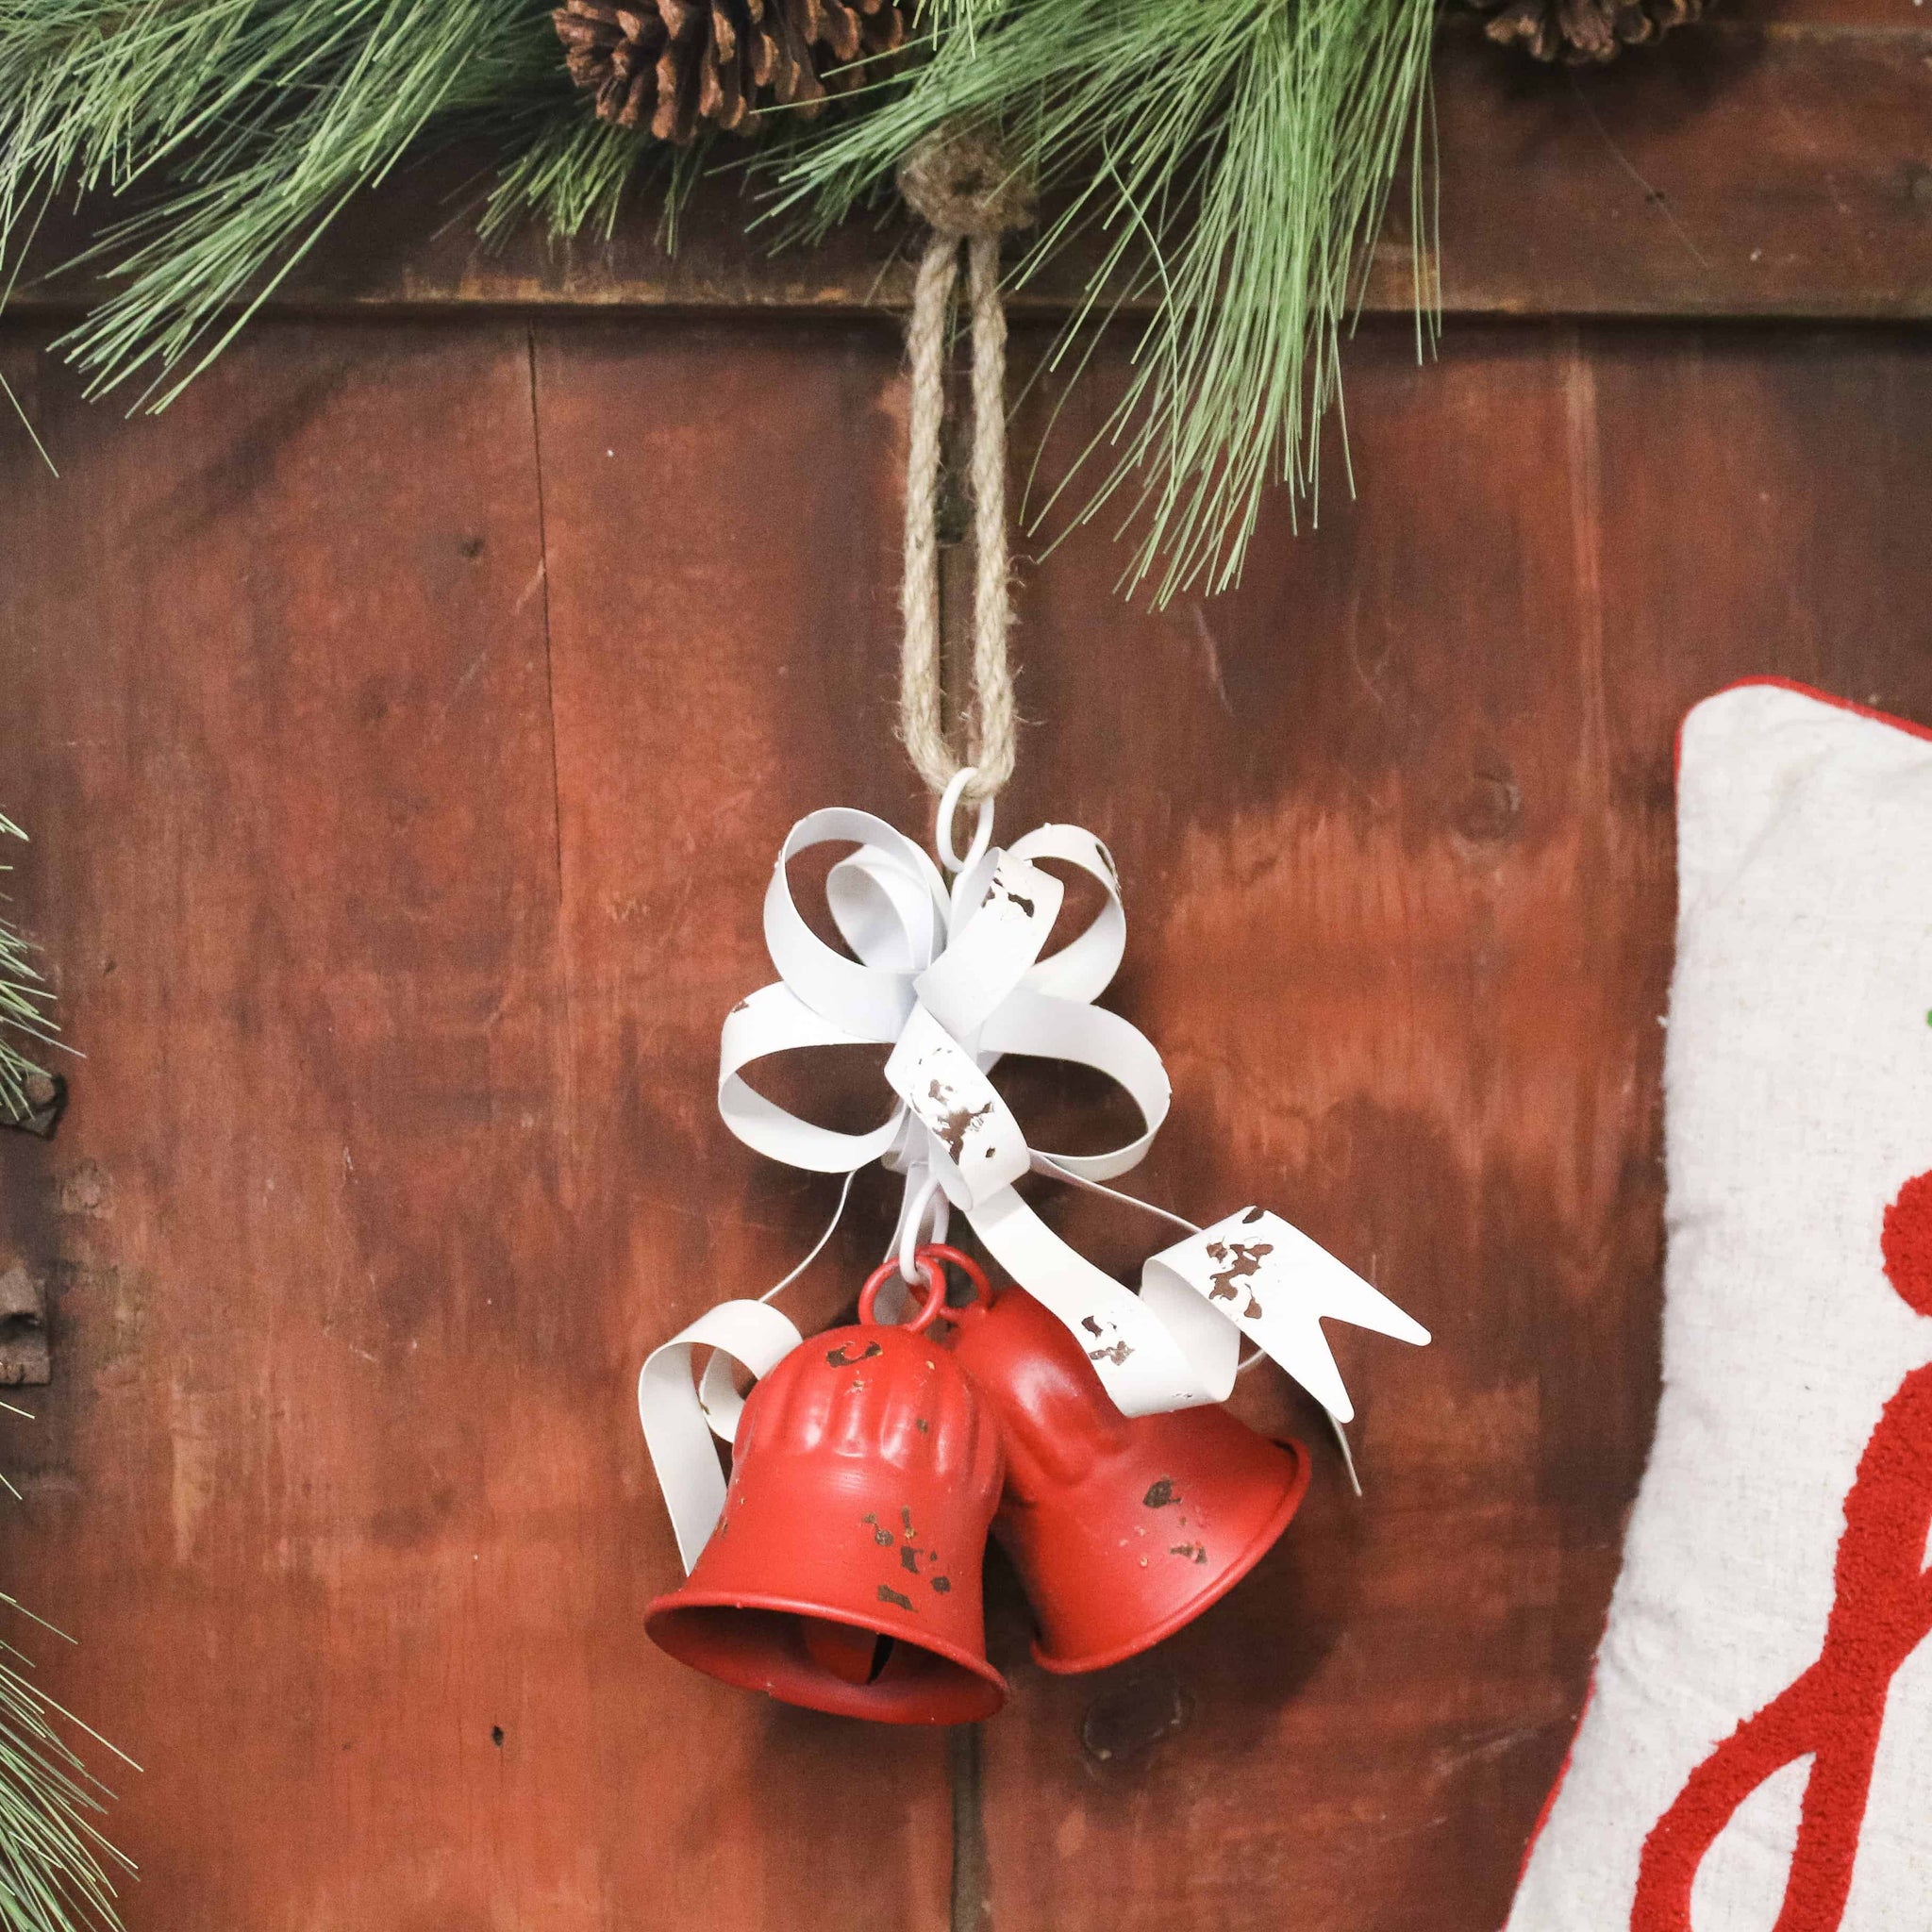 Large Red Metal Christmas Bells in Vintage Farmhouse Style, Set of Three